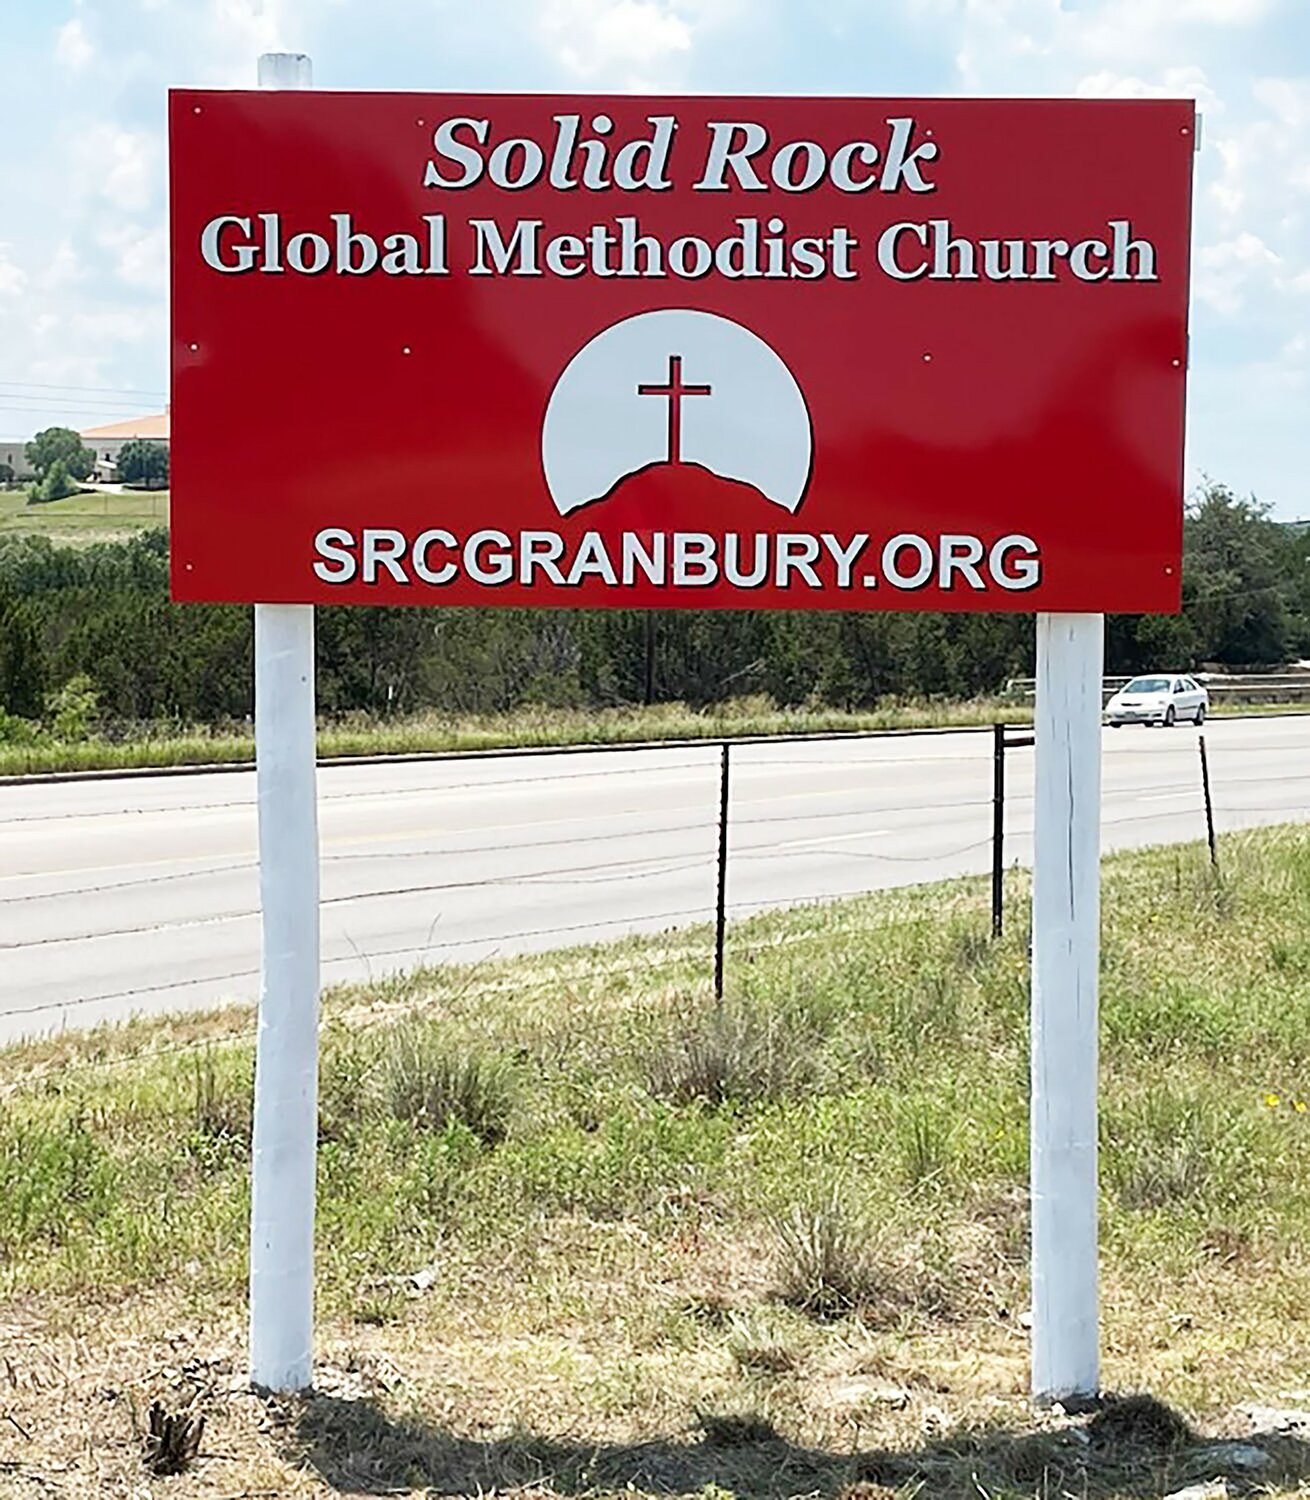 Granbury residents Debbie Parcel and Jake Caraway are just two of about 50 community members who decided to step out in faith completely and organize their own church on Aug. 21, 2022, called Solid Rock Global Methodist Church.